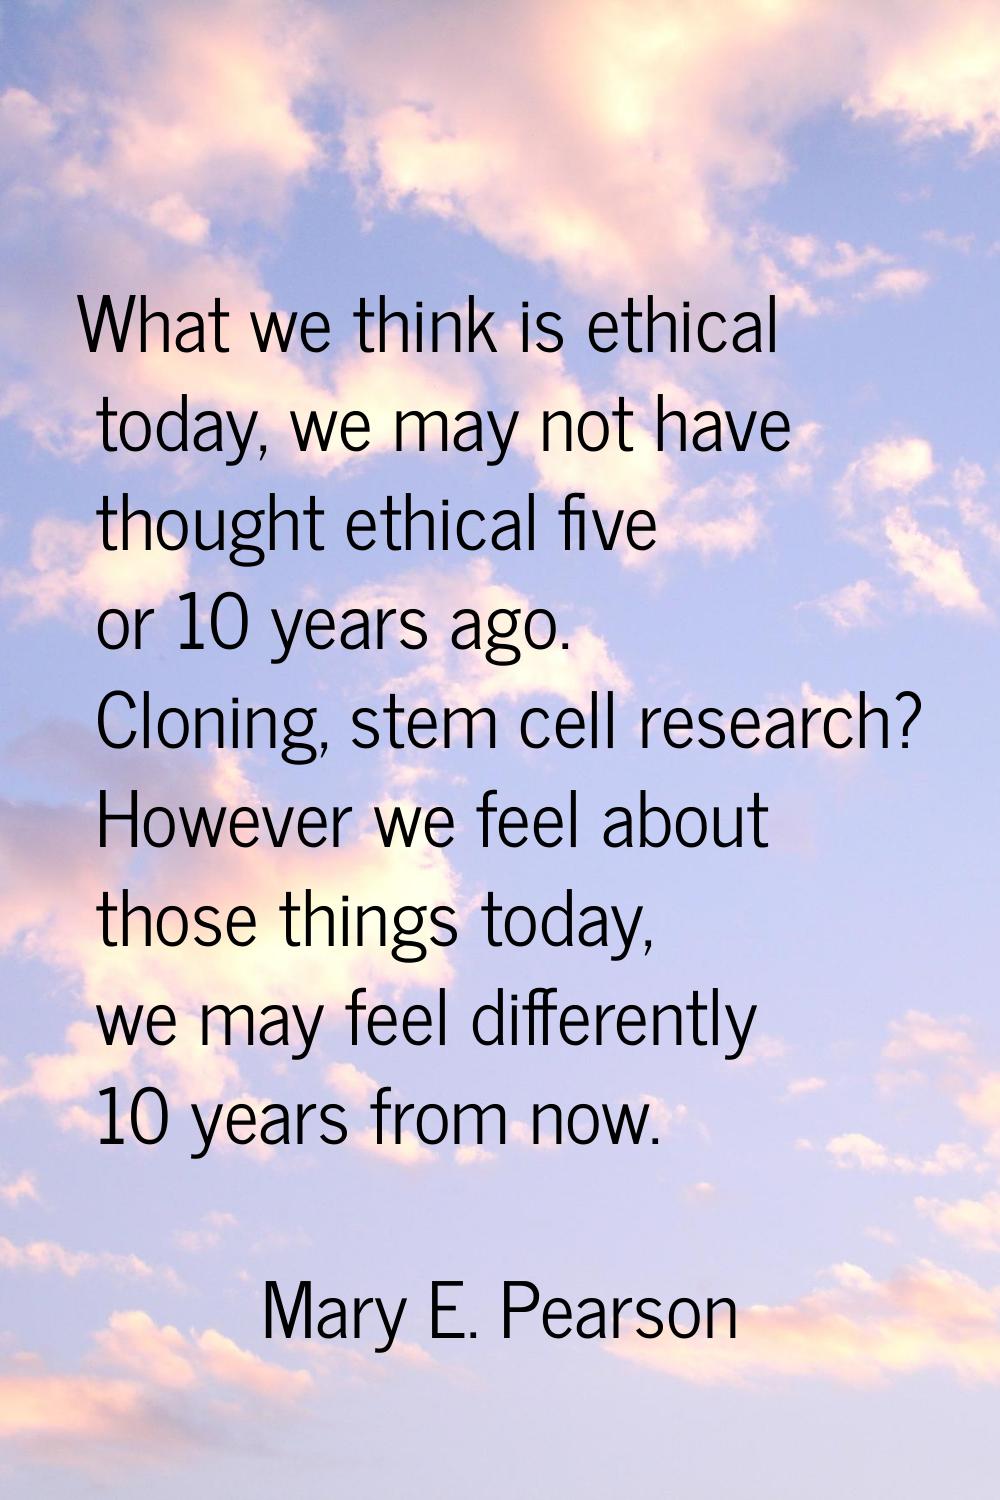 What we think is ethical today, we may not have thought ethical five or 10 years ago. Cloning, stem